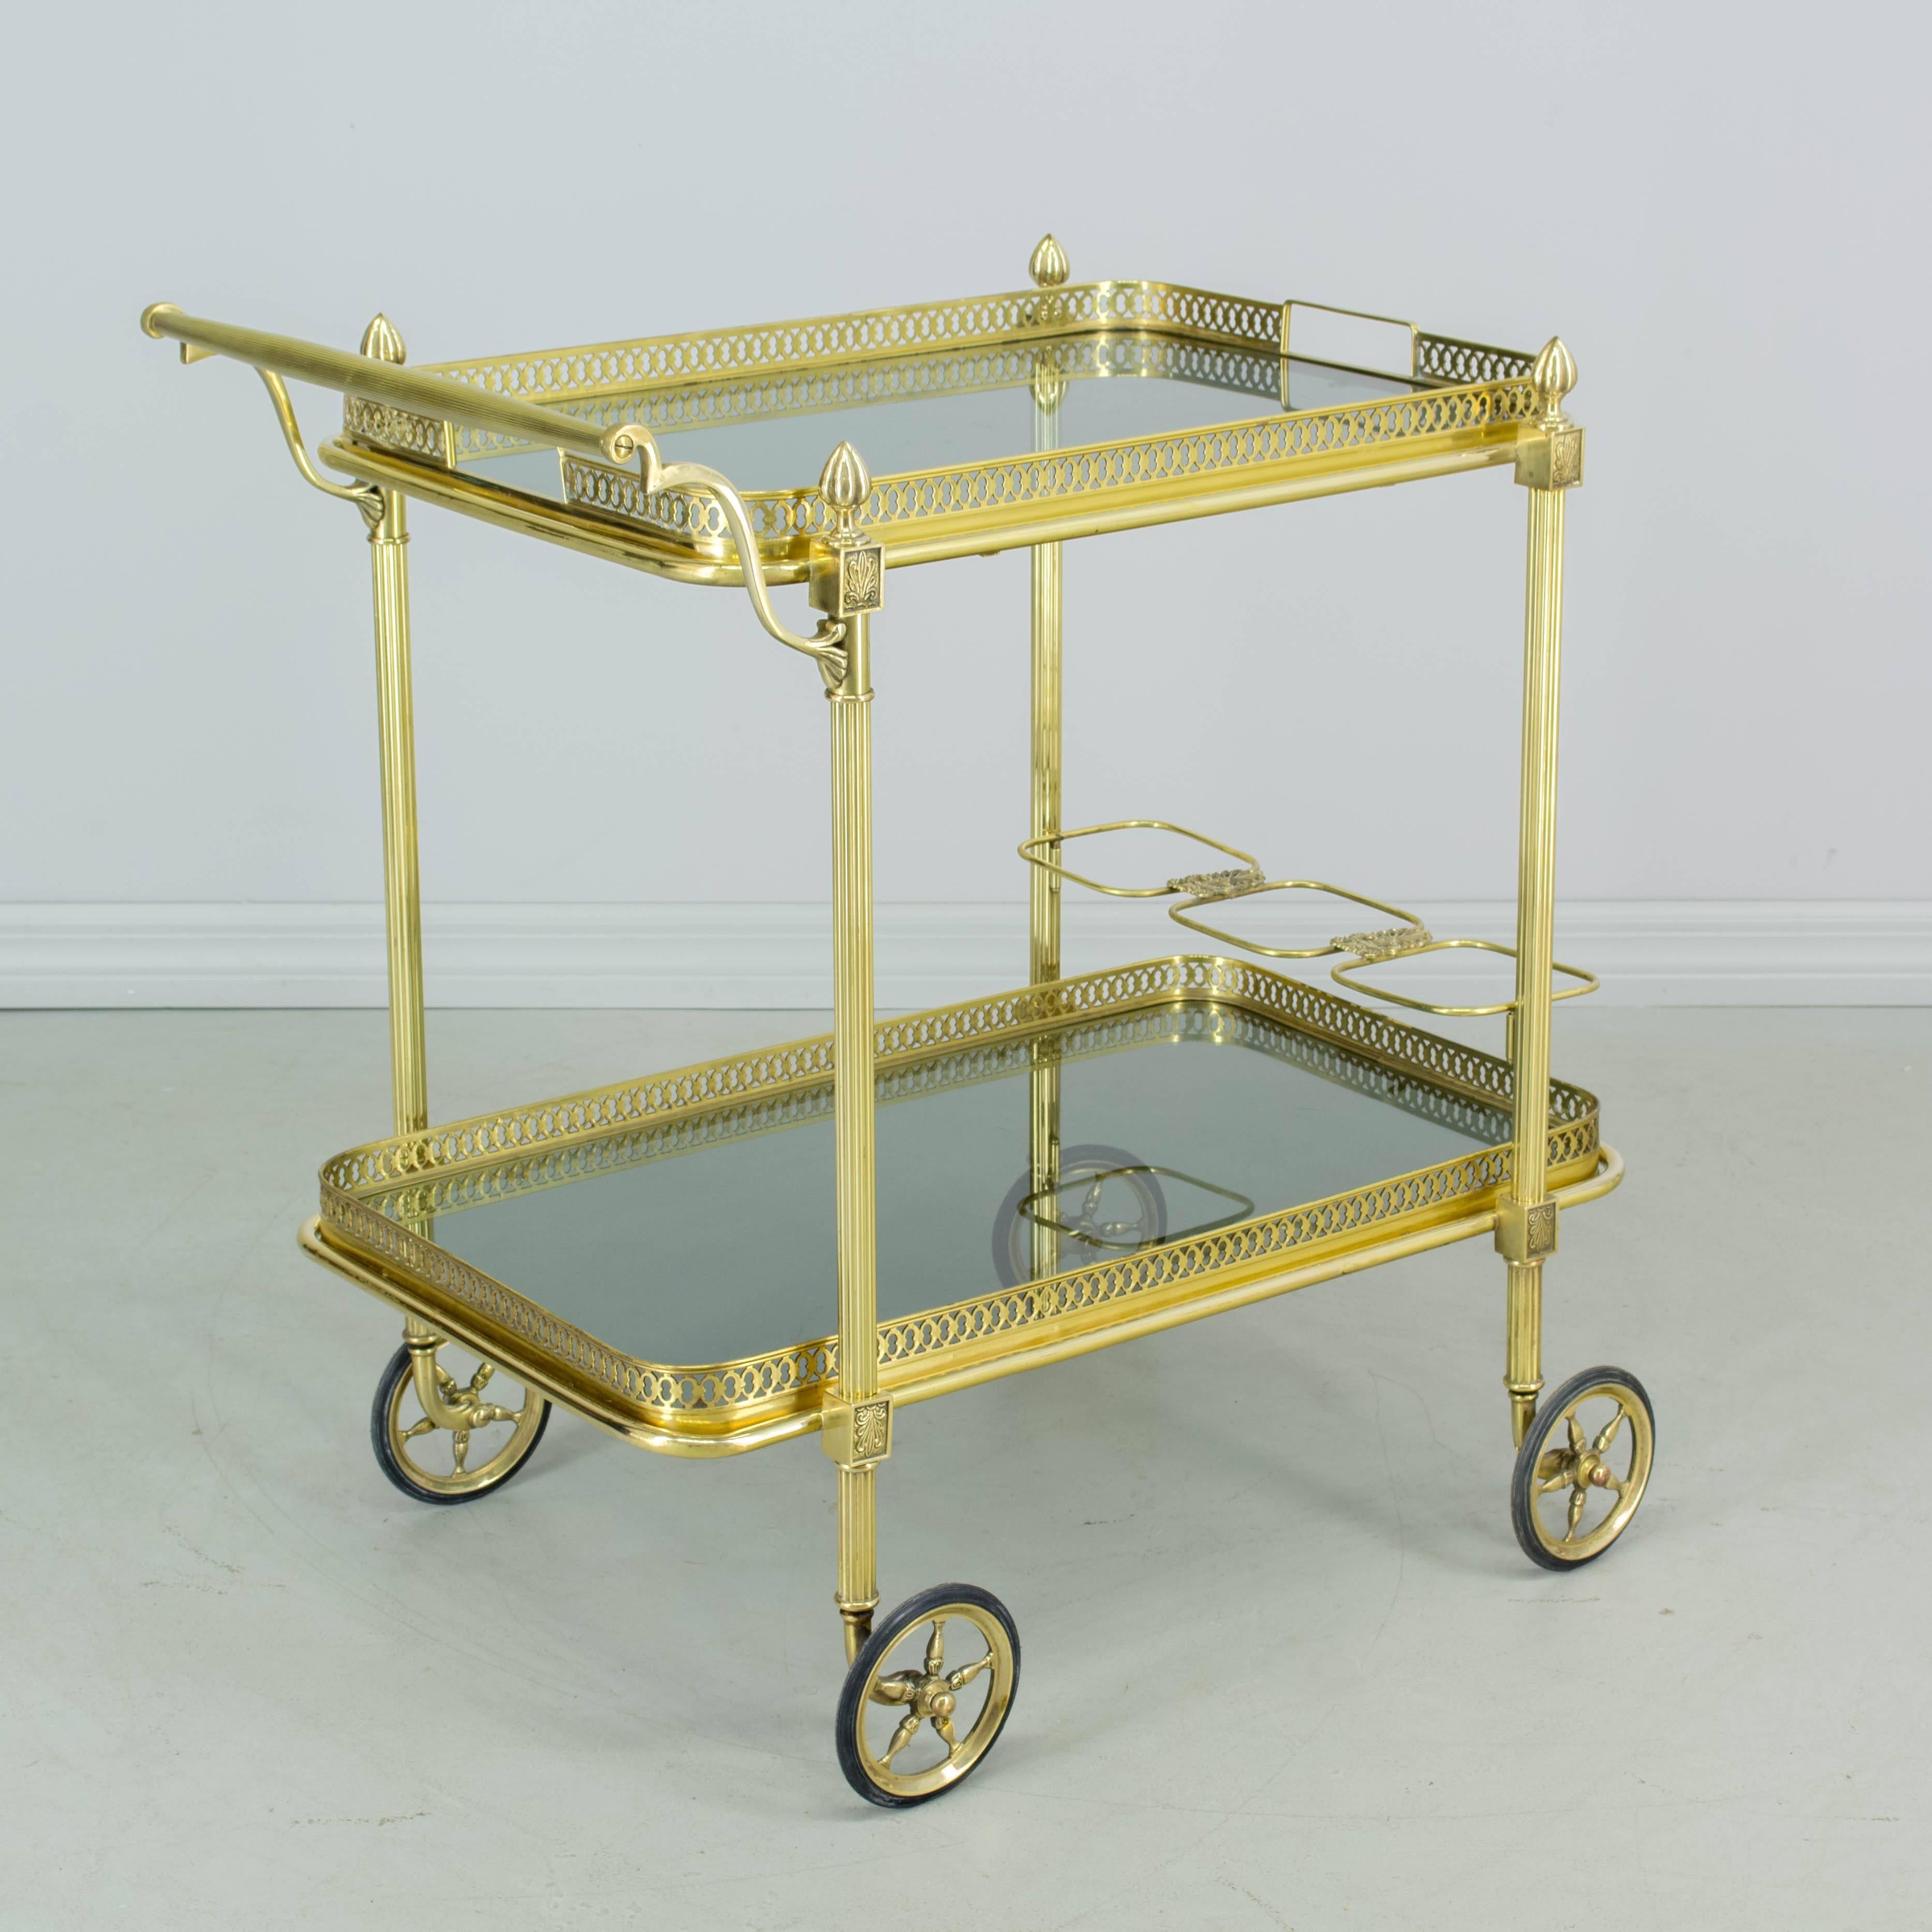 A French bar cart or tea trolley of very fine quality made of brass with smoke glass. Both top and bottom trays remove for serving. Removable bottle rack with decorative detail holds three bottles. Wheels are in excellent condition and glide